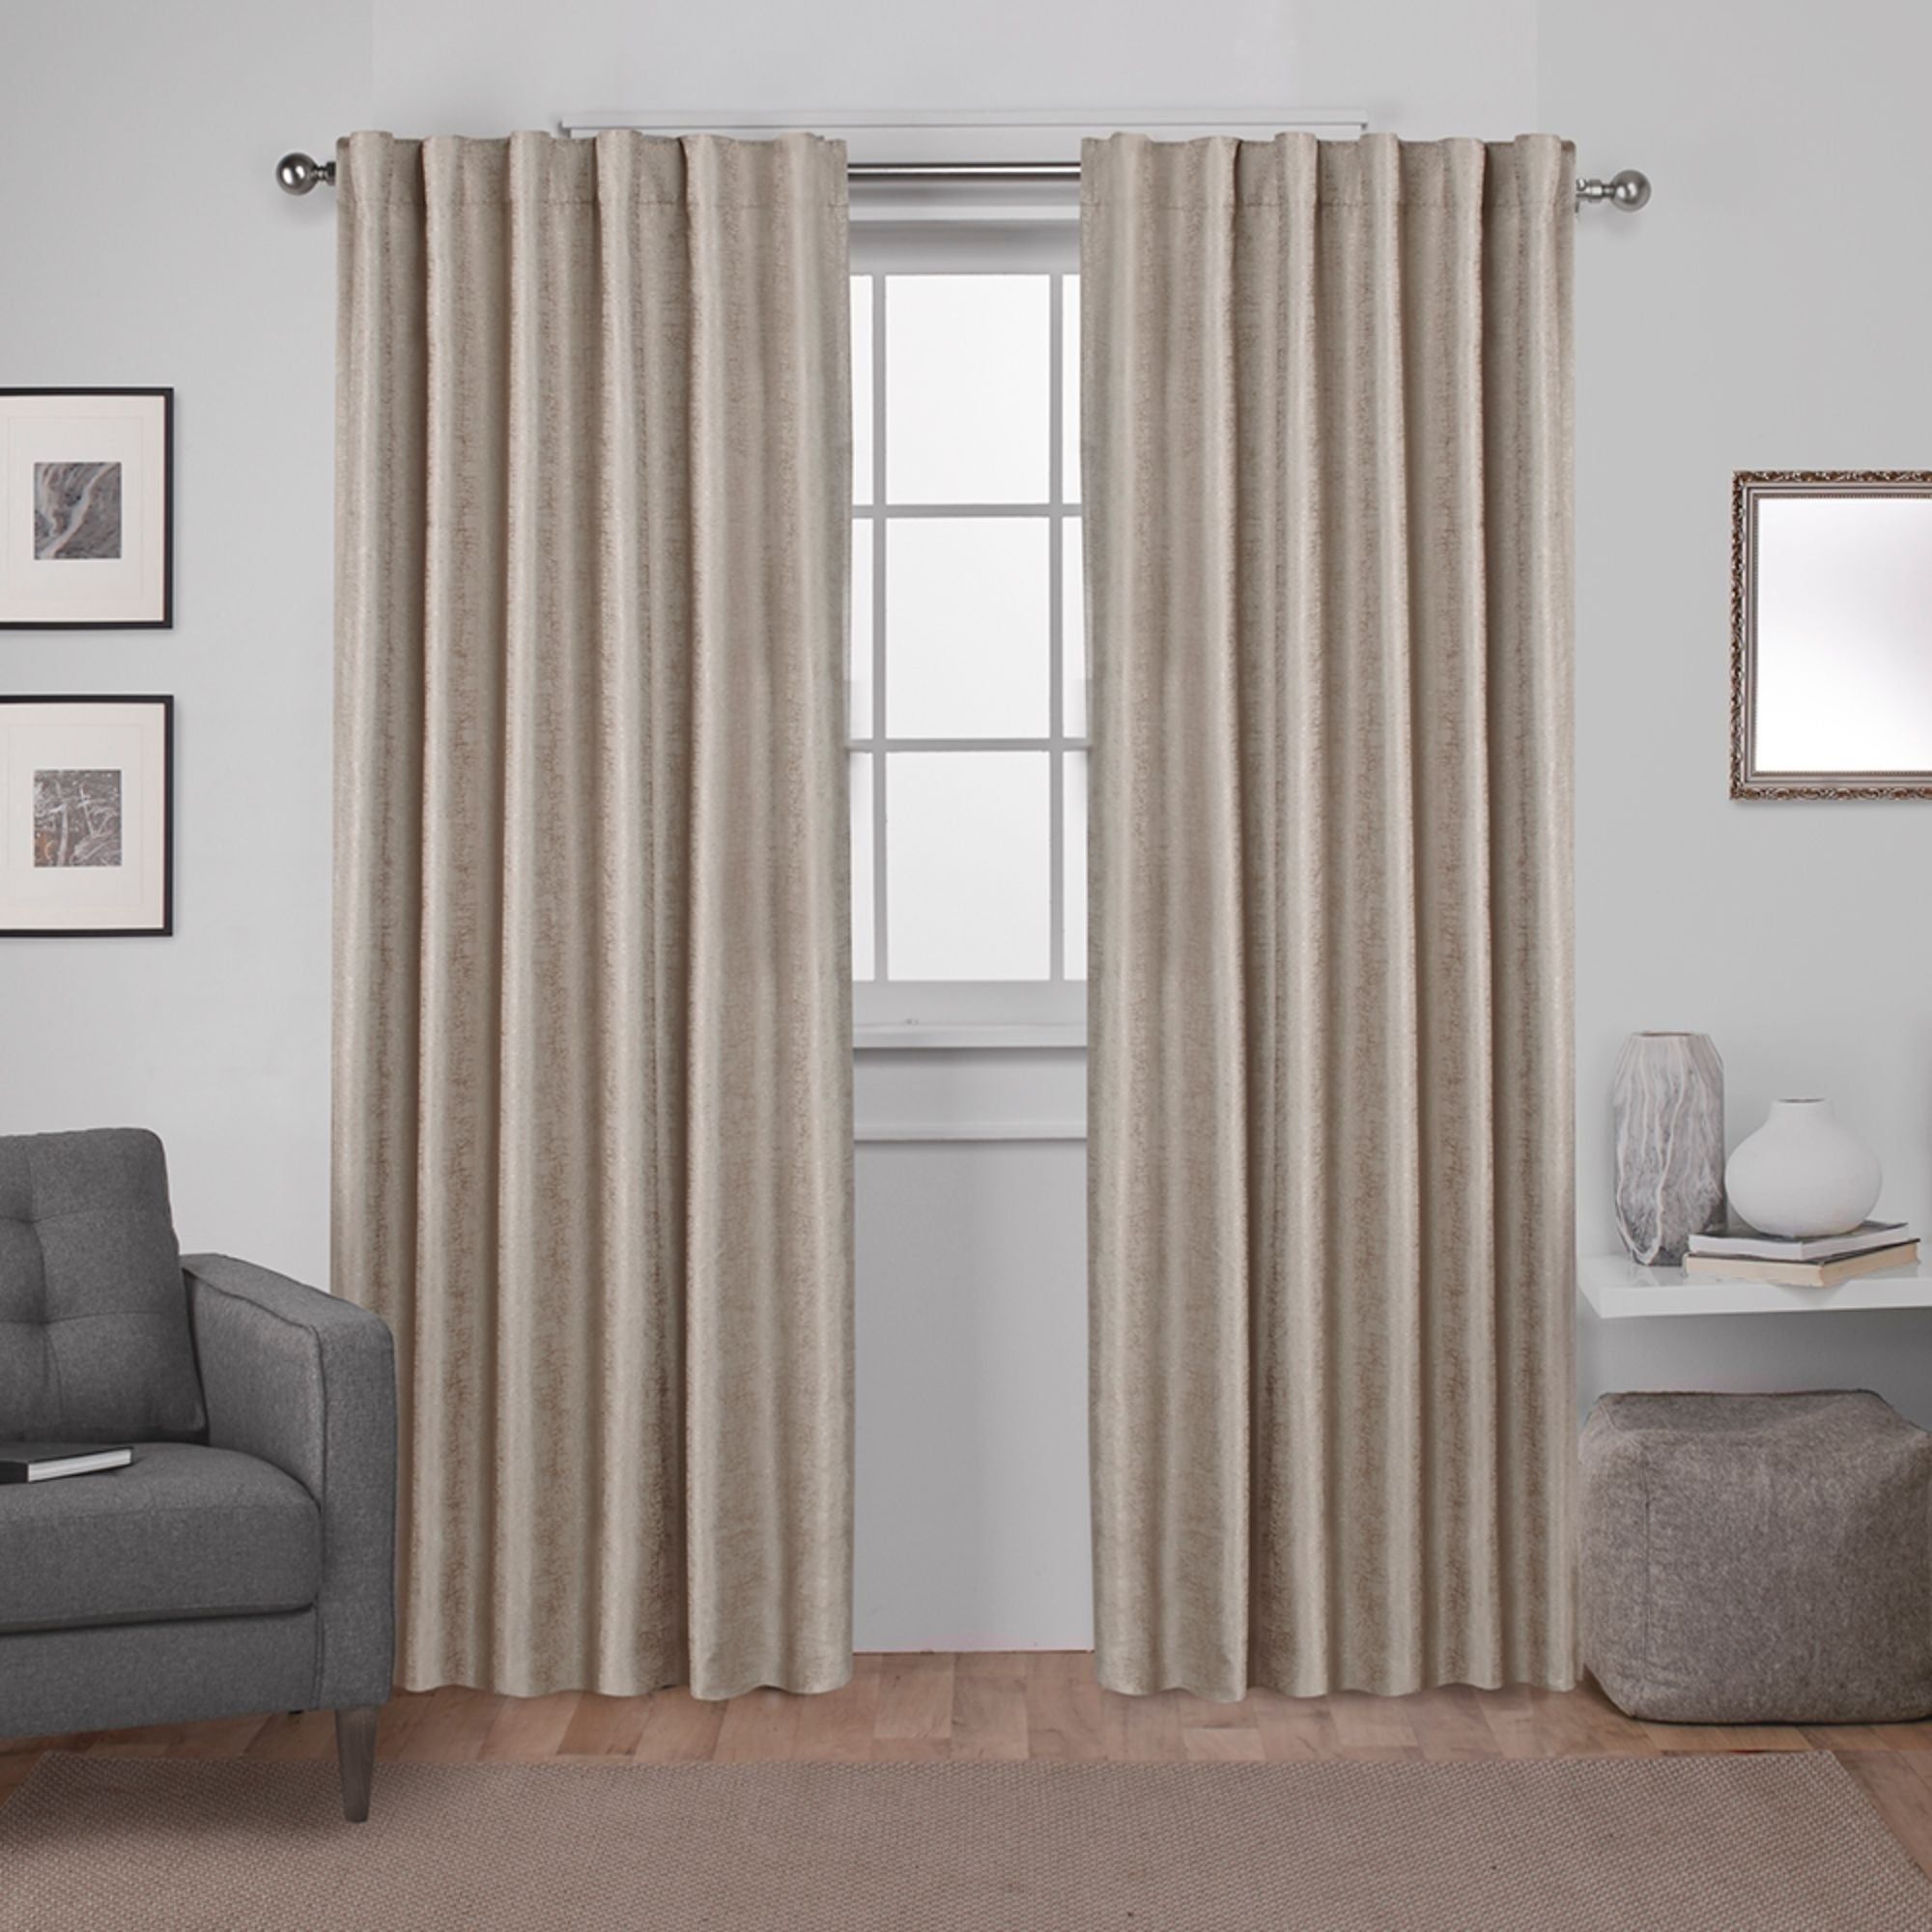 Ati Home Zeus Thermal Woven Blackout Back Tab Top Curtain Panel Pair Intended For Cyrus Thermal Blackout Back Tab Curtain Panels (View 5 of 20)